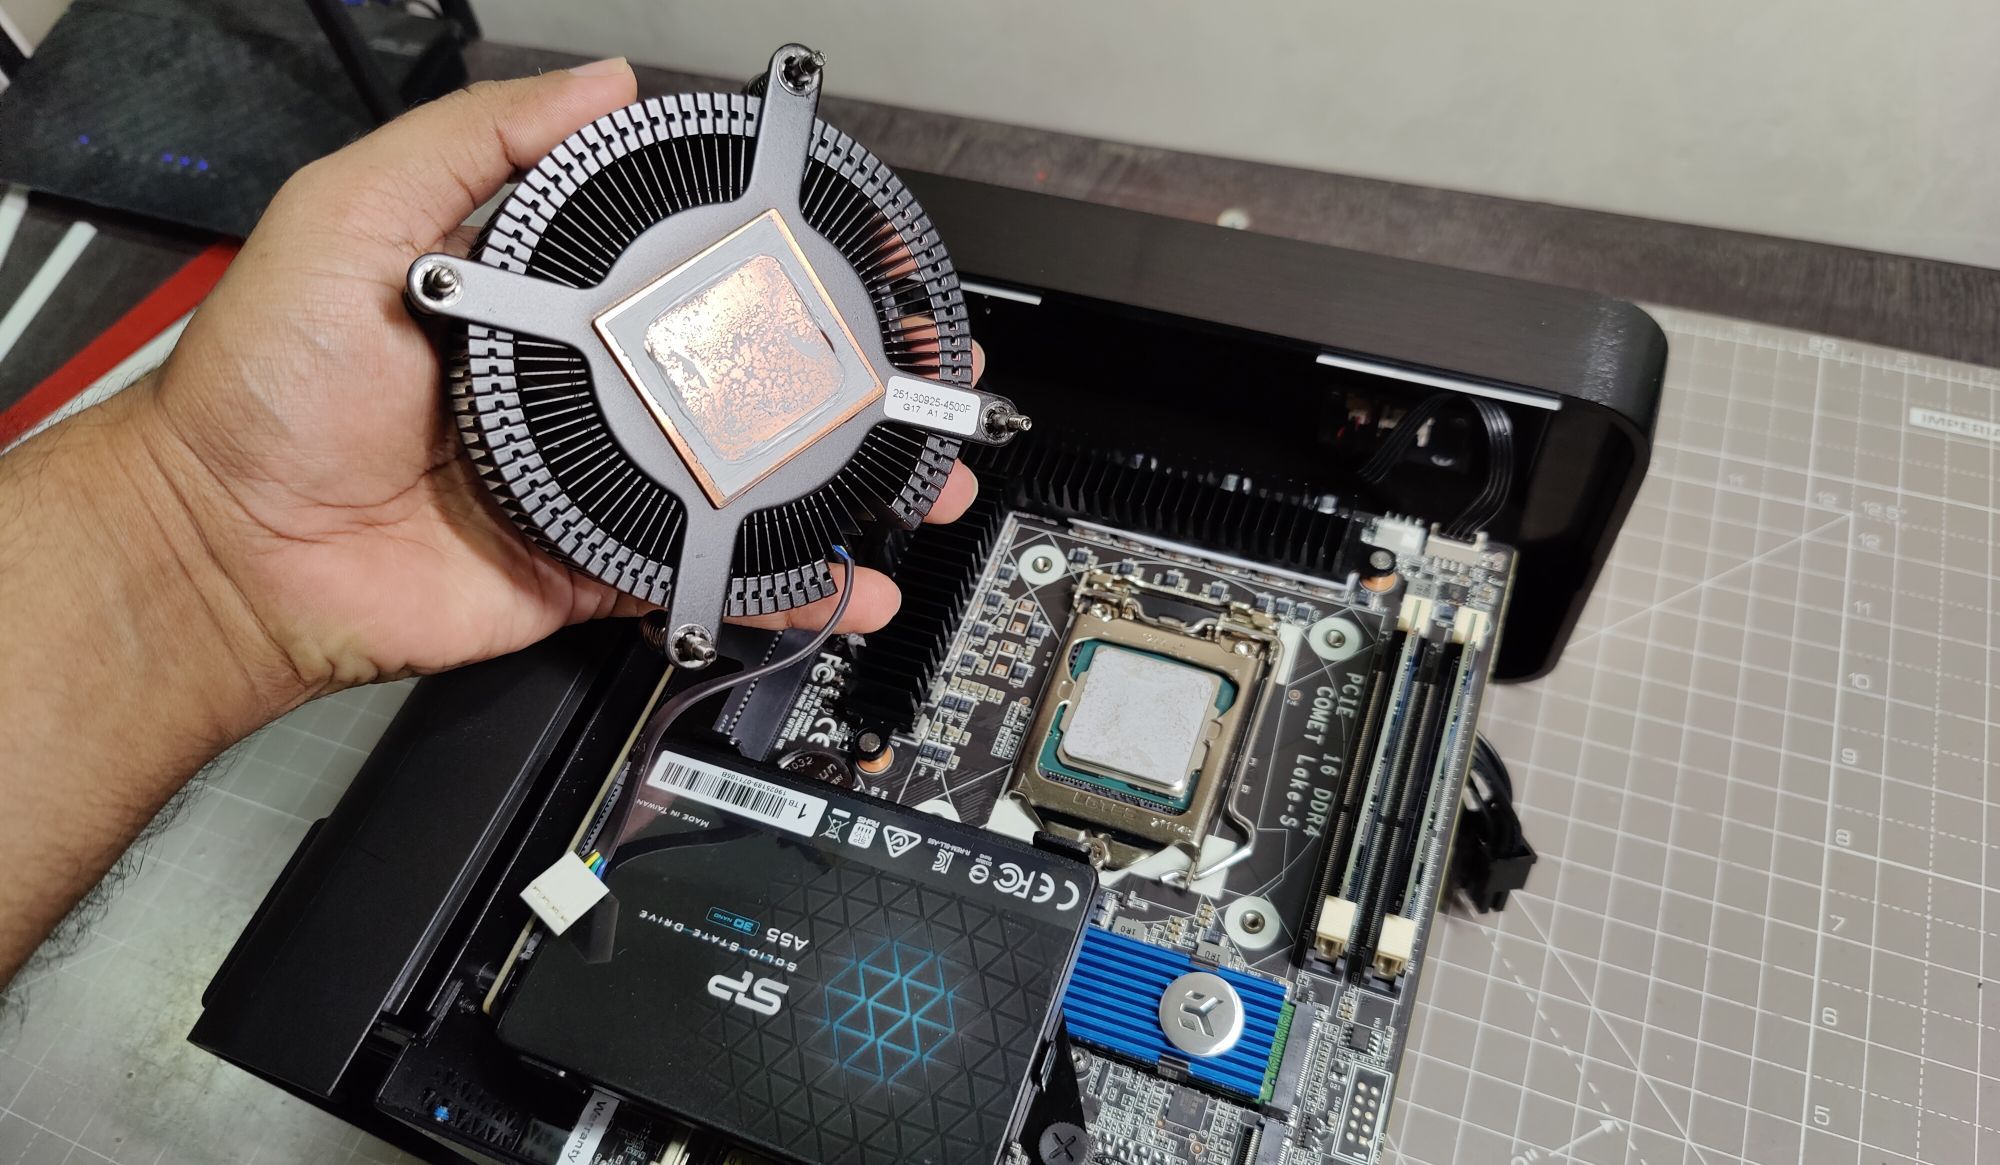 Cpu cooler heat sink removal.